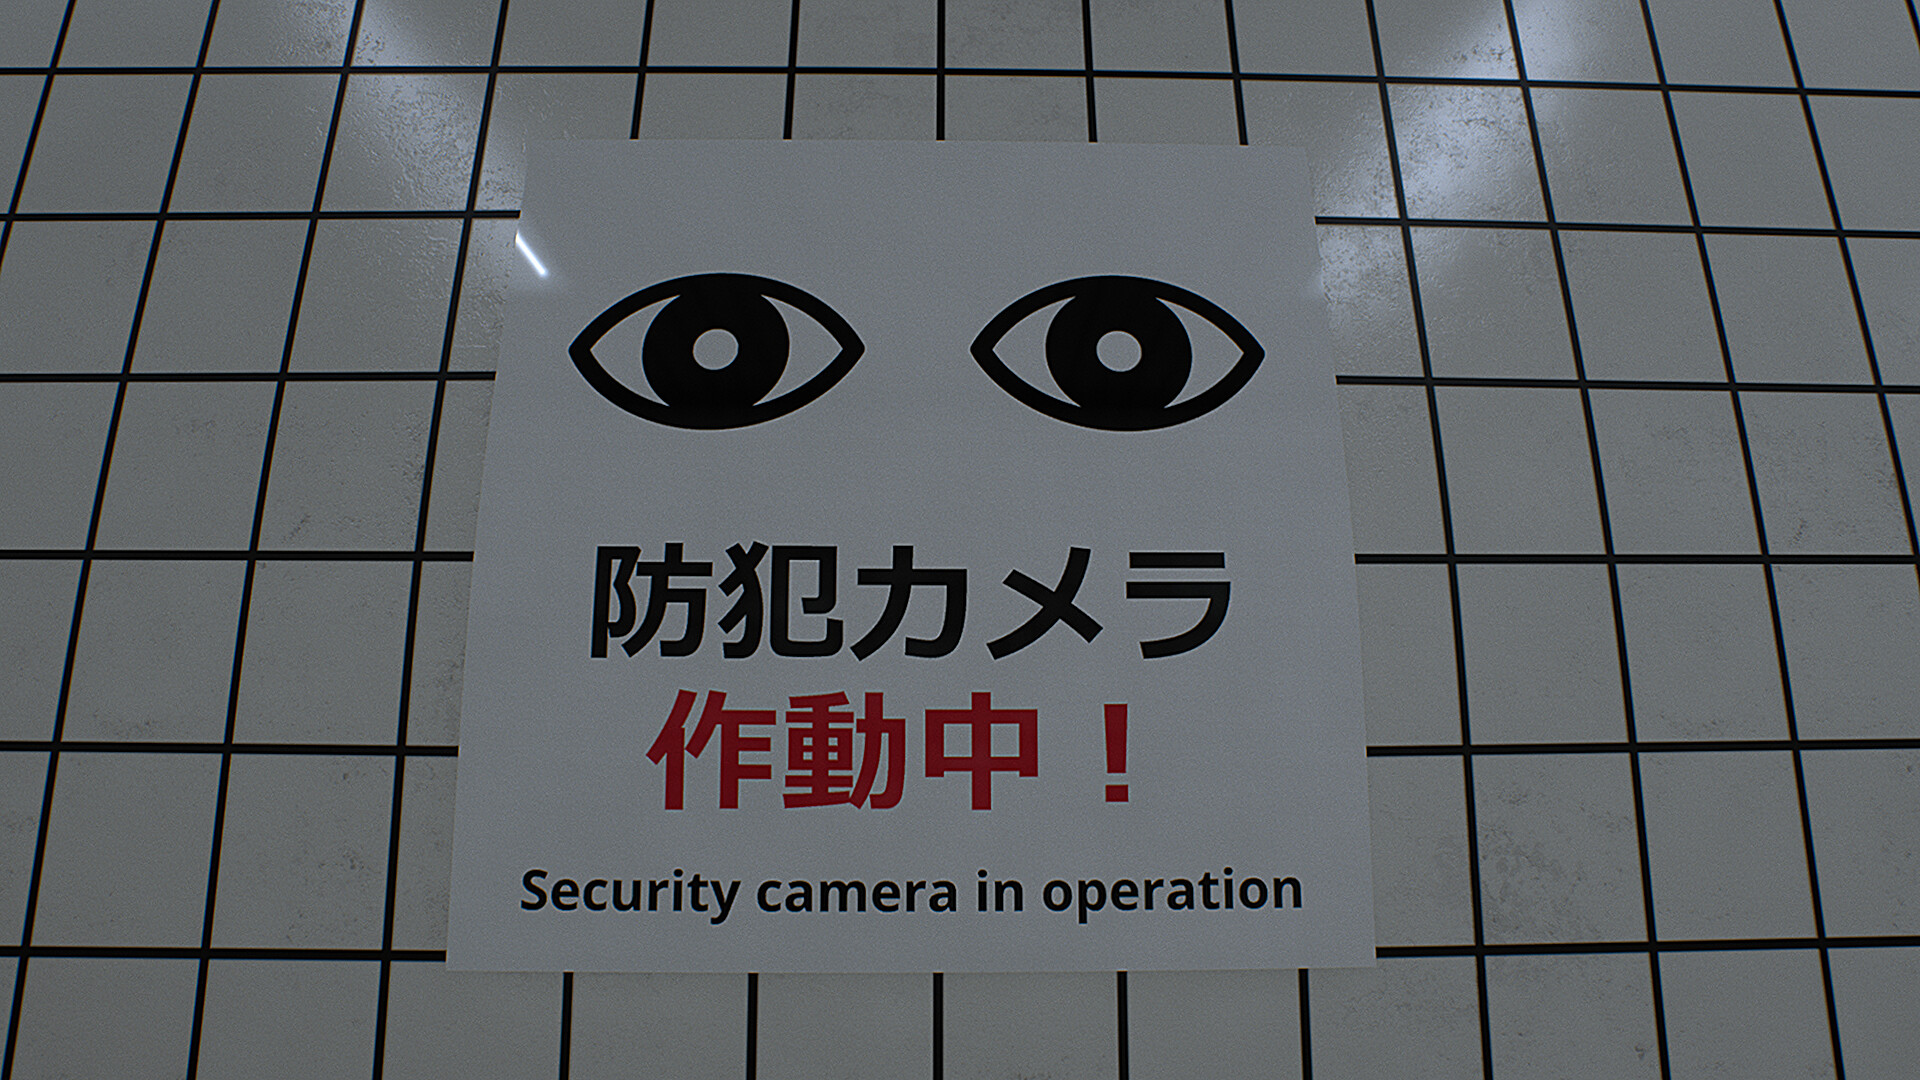 The Exit 8 security camera sign by Kotake Create